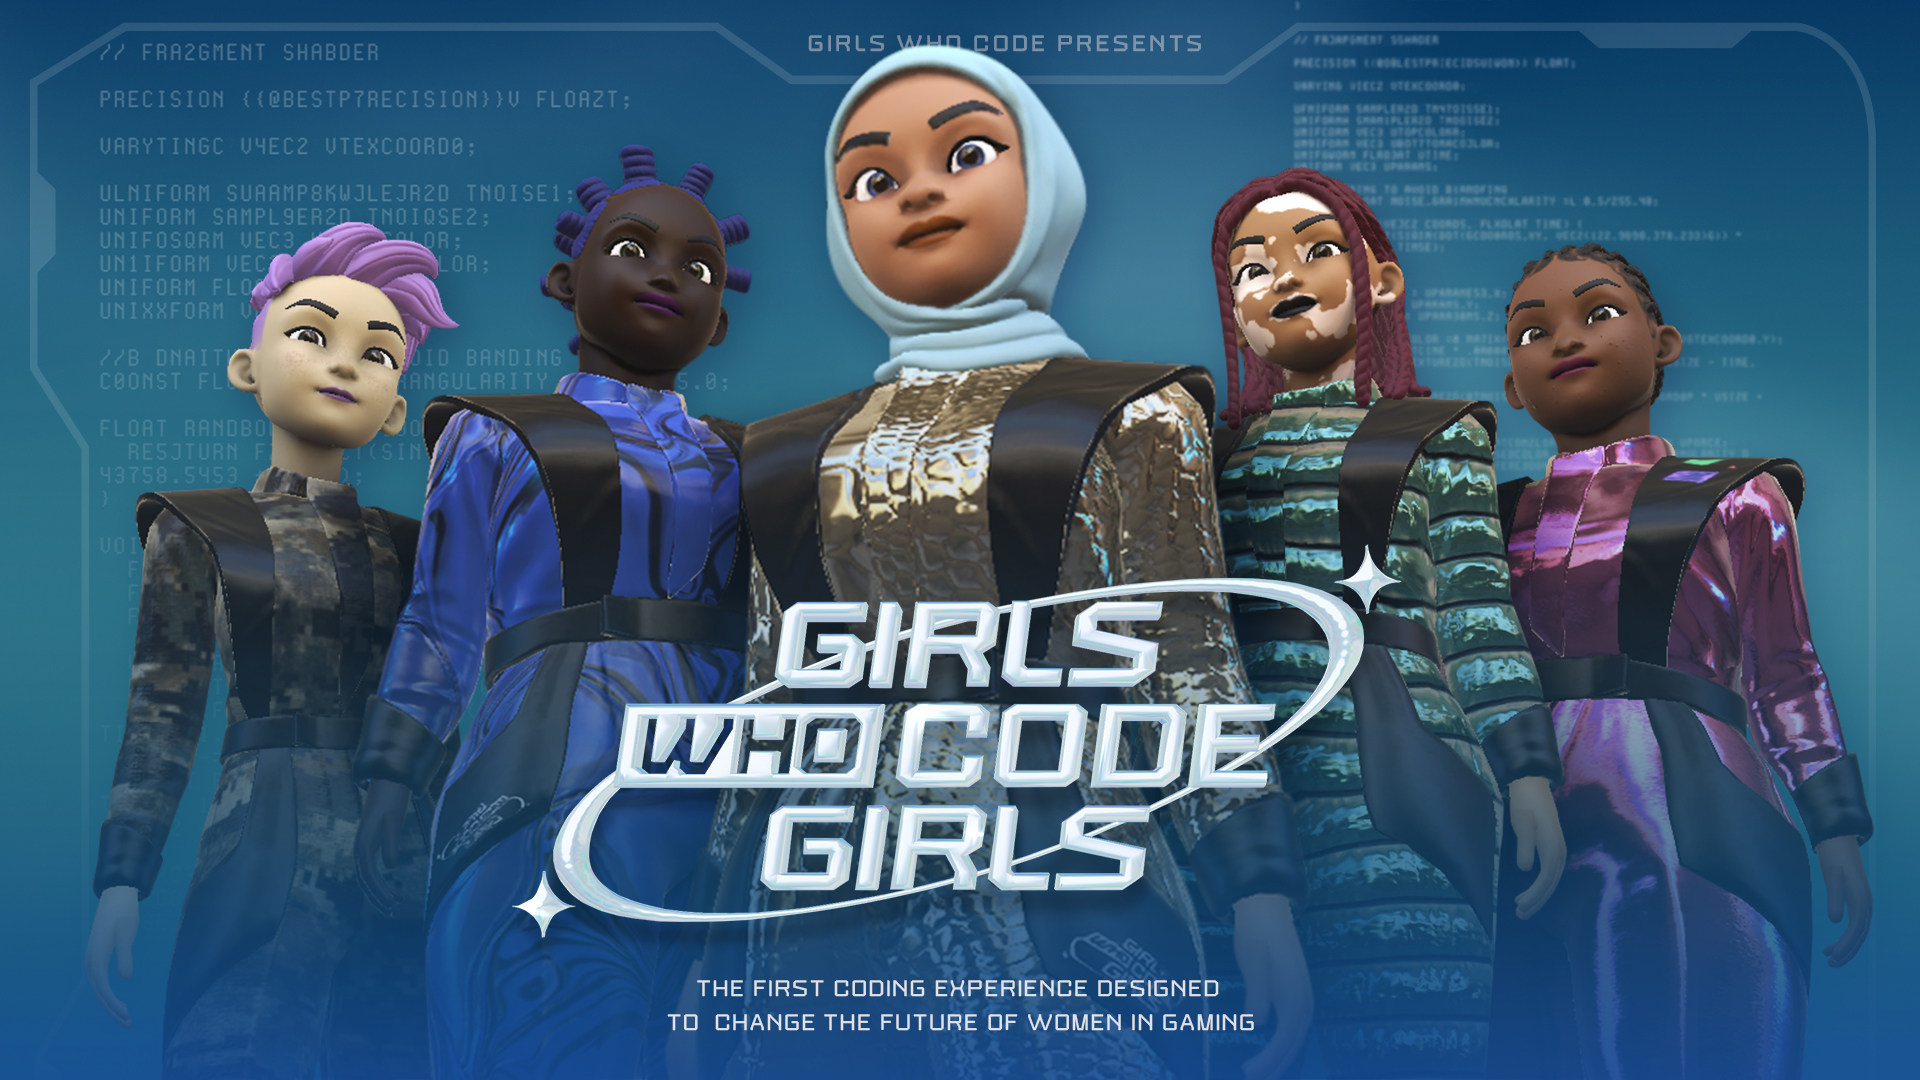 Girls Who Code Launches Digital Experience to Change the Future of Women in Gaming